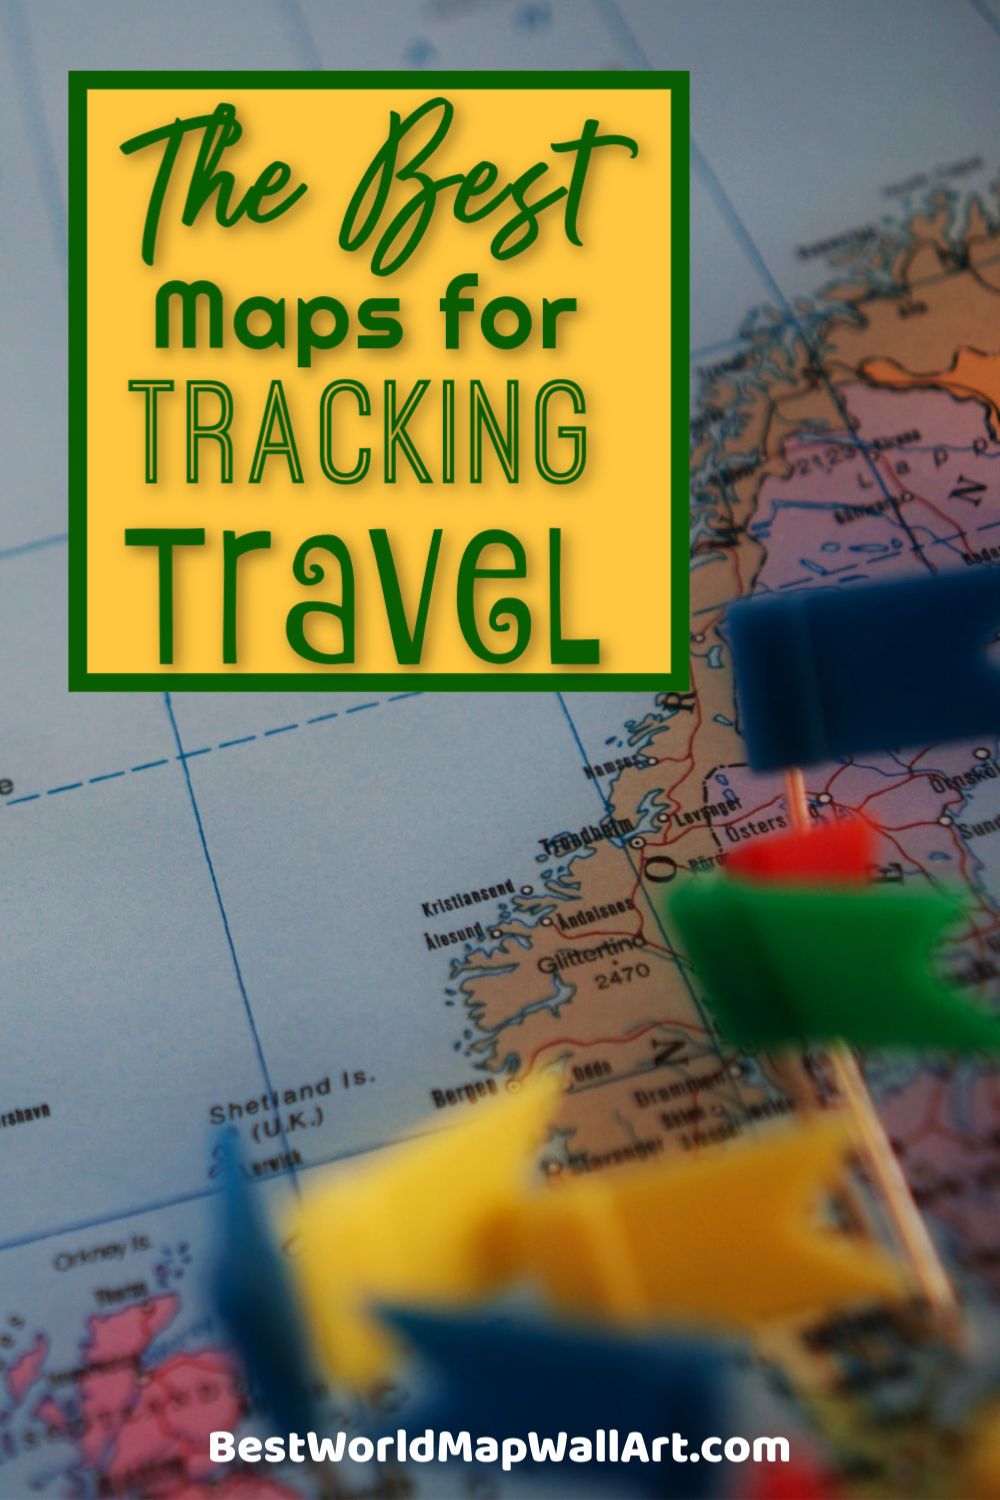 online map to track travel